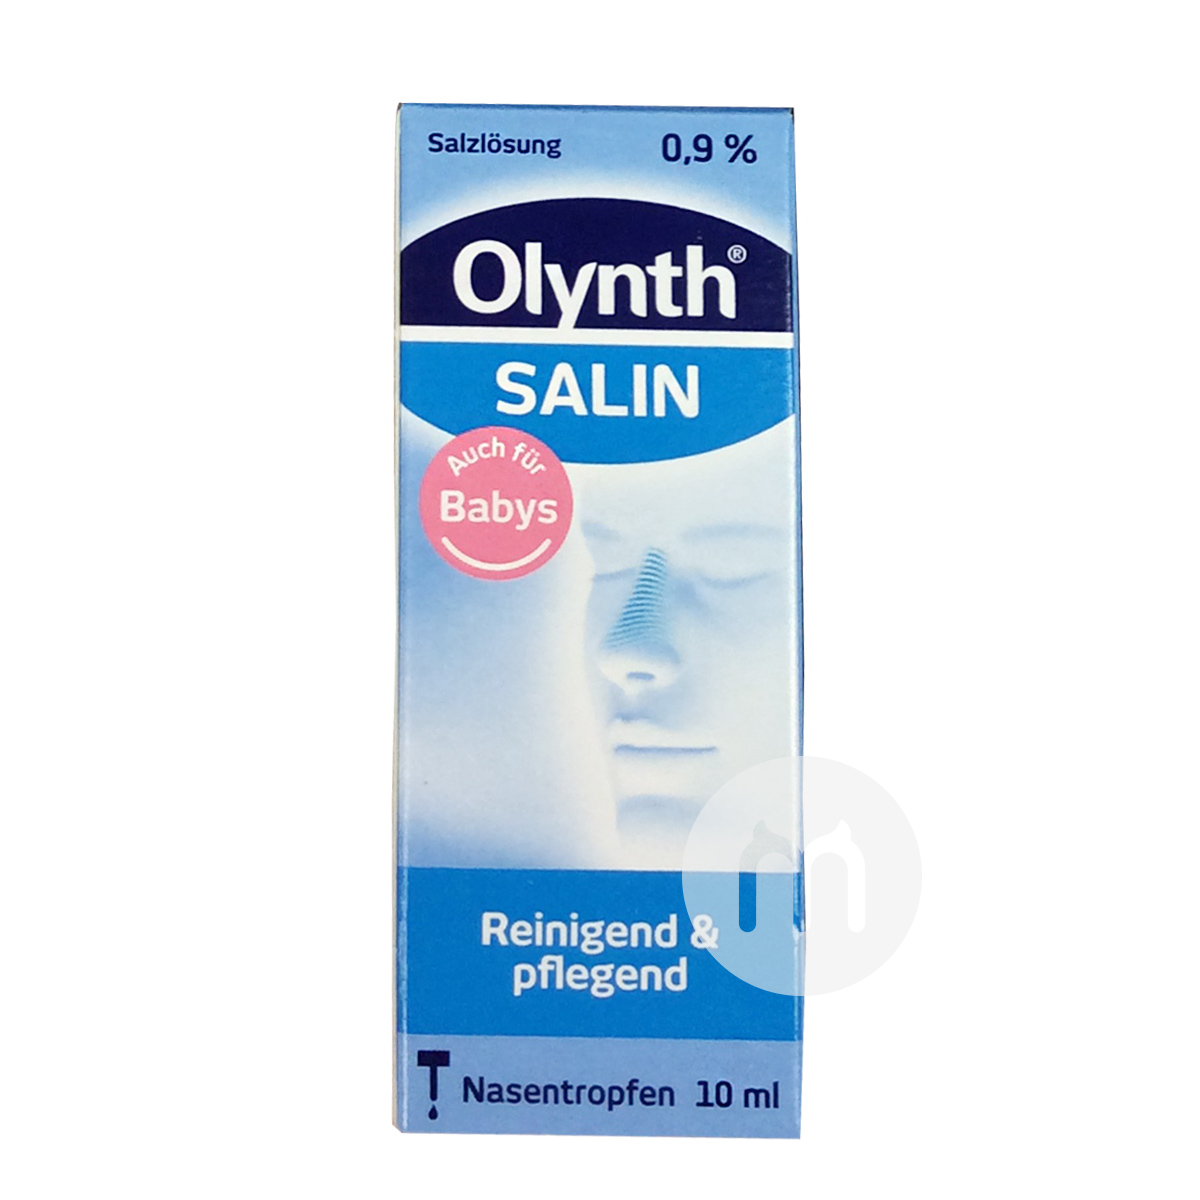 olynth Jerman olynth cold runny nose snuffle saltwater drops nose over...